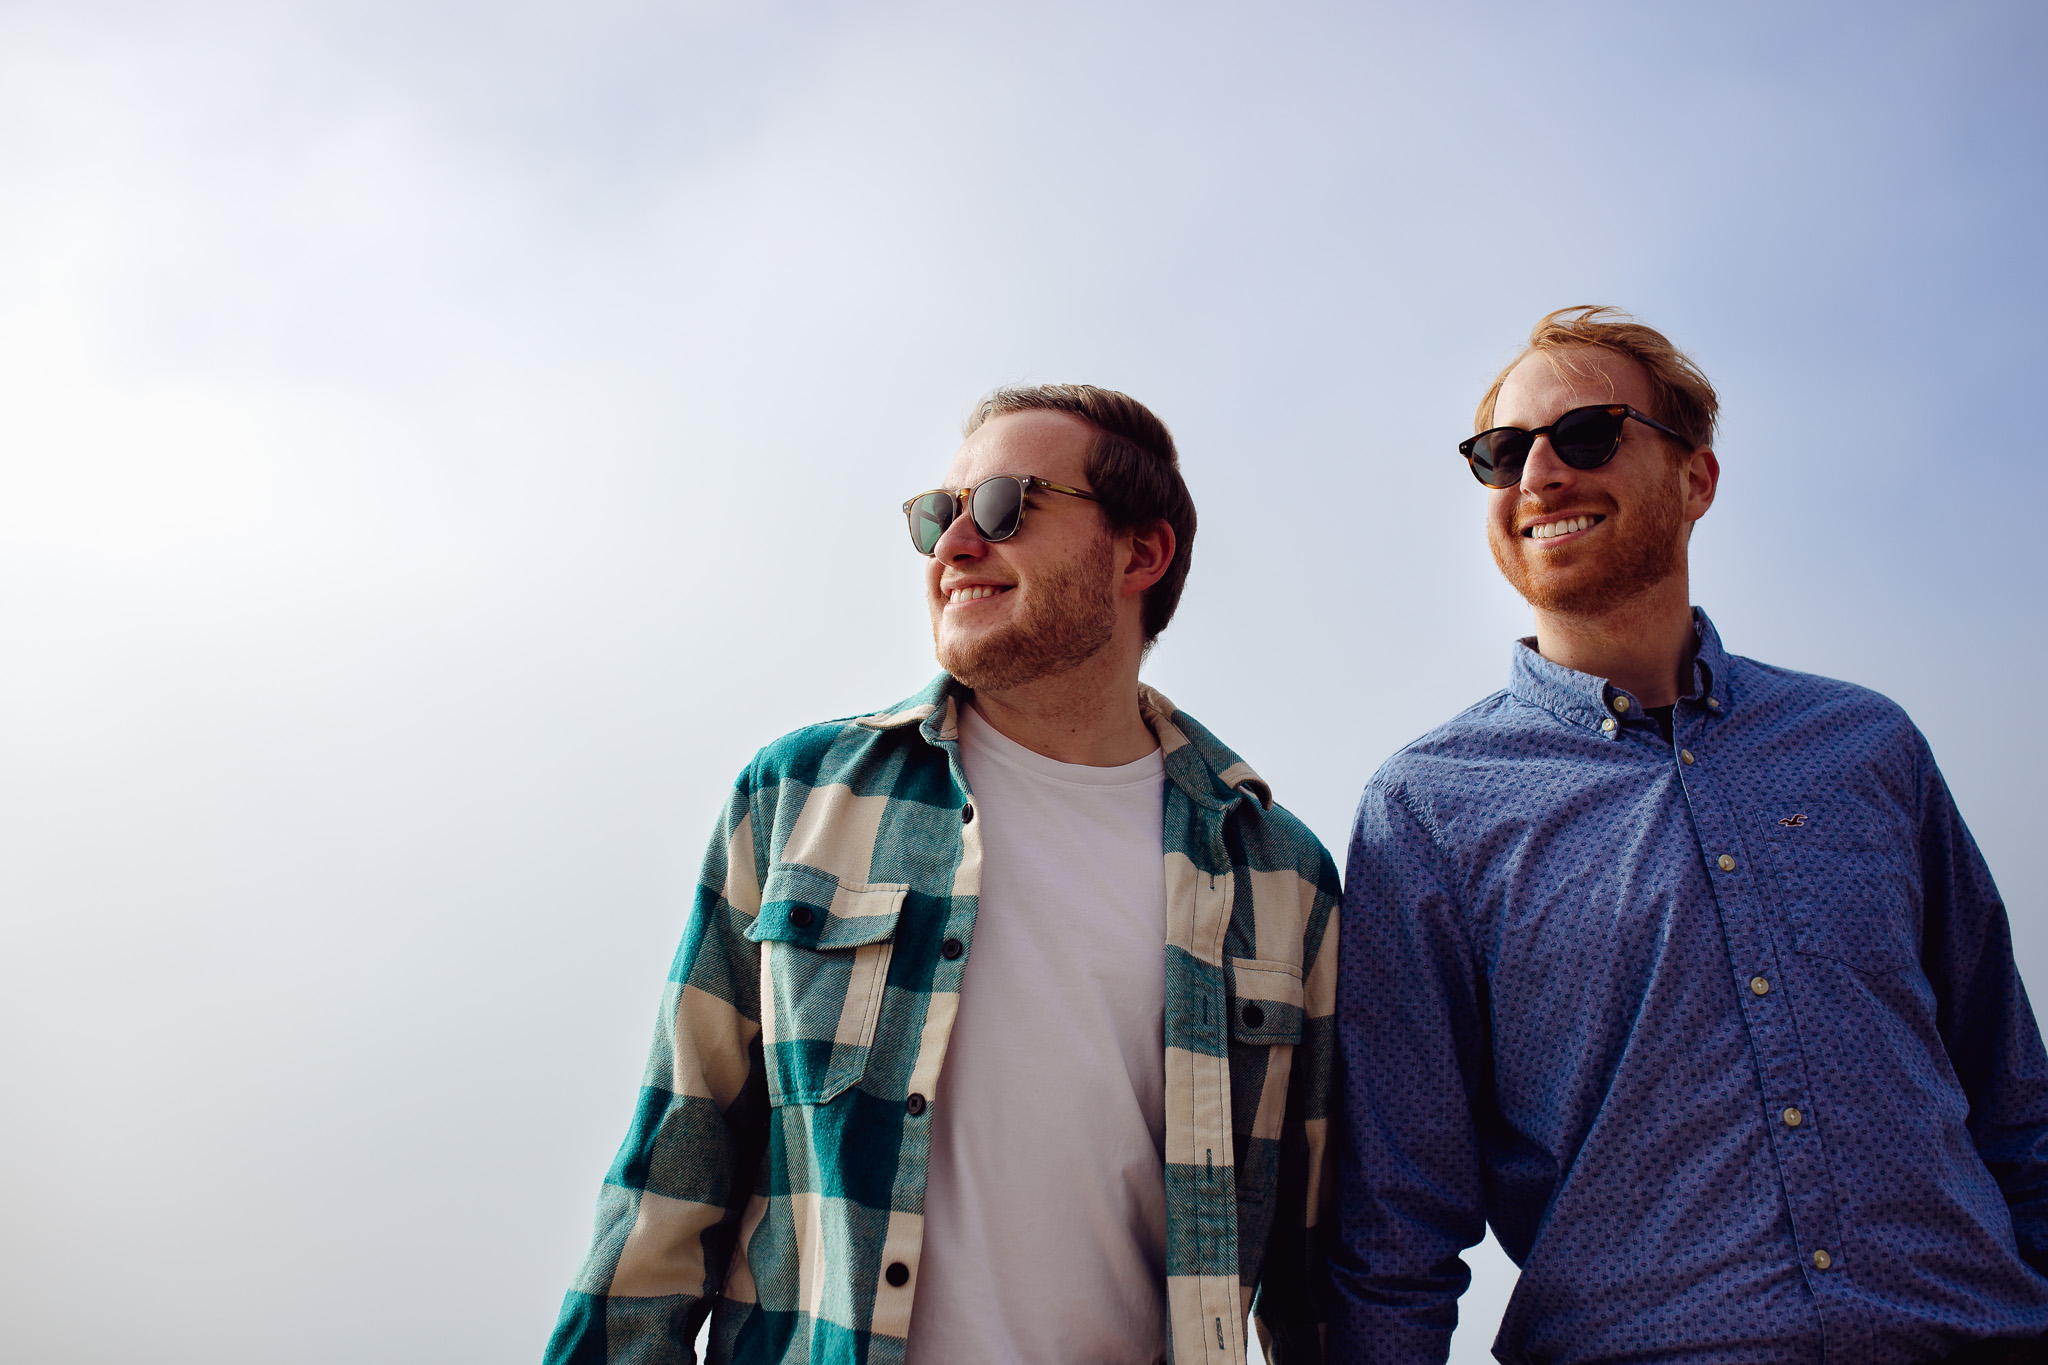 LGBTQ+ couple wearing sunglasses holding hands and smiling during their engagement shoot